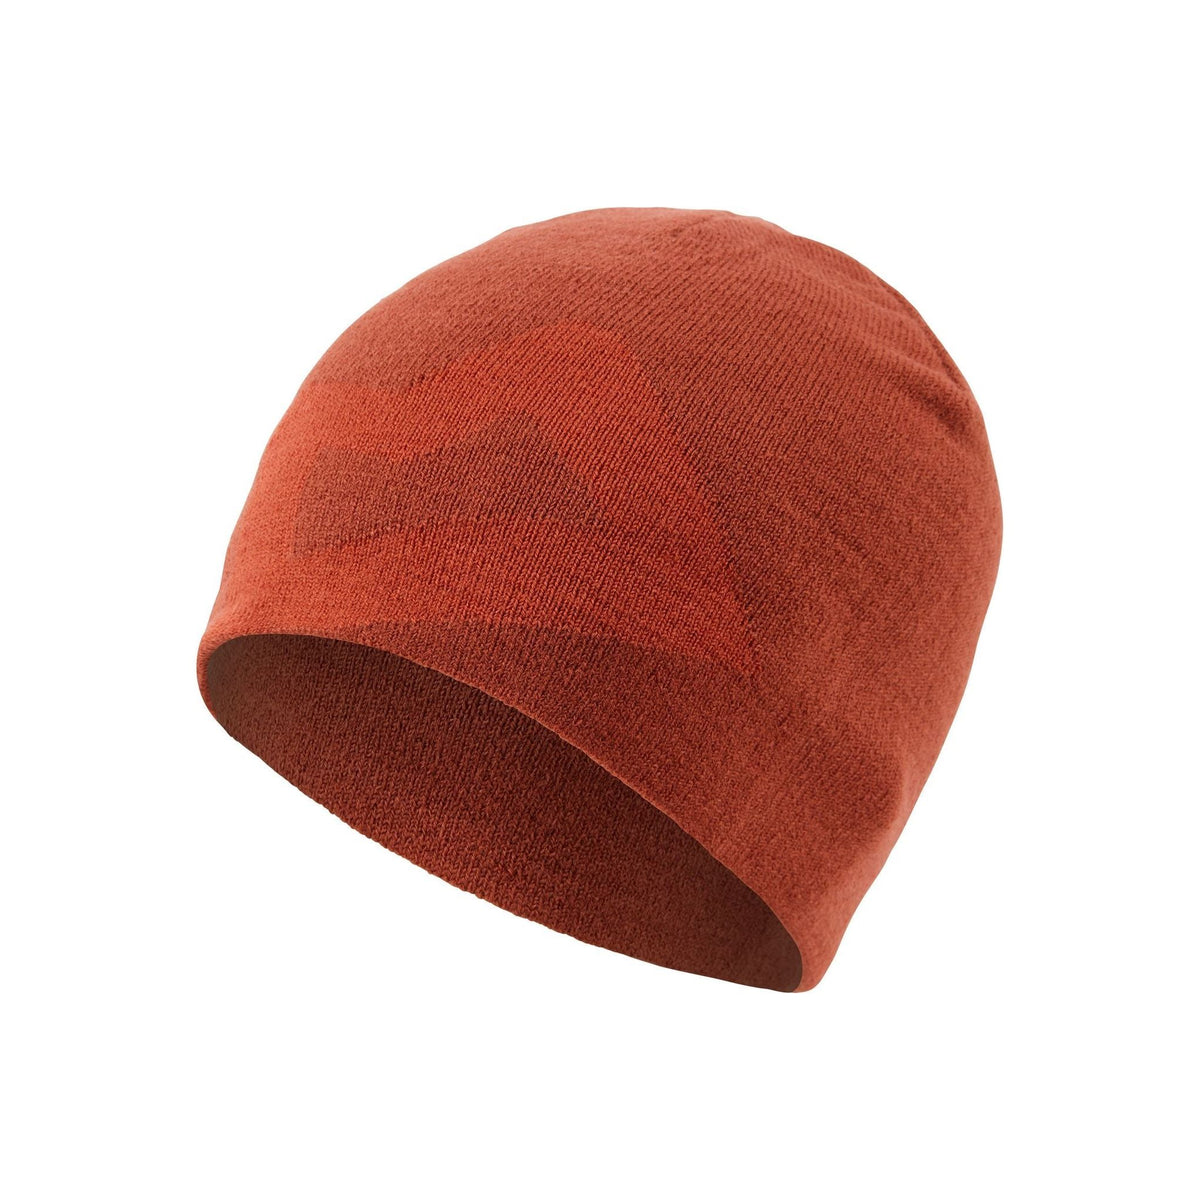 Mountain Equipment Branded Knitted Beanie Hat - Red Ochre/Red Rock